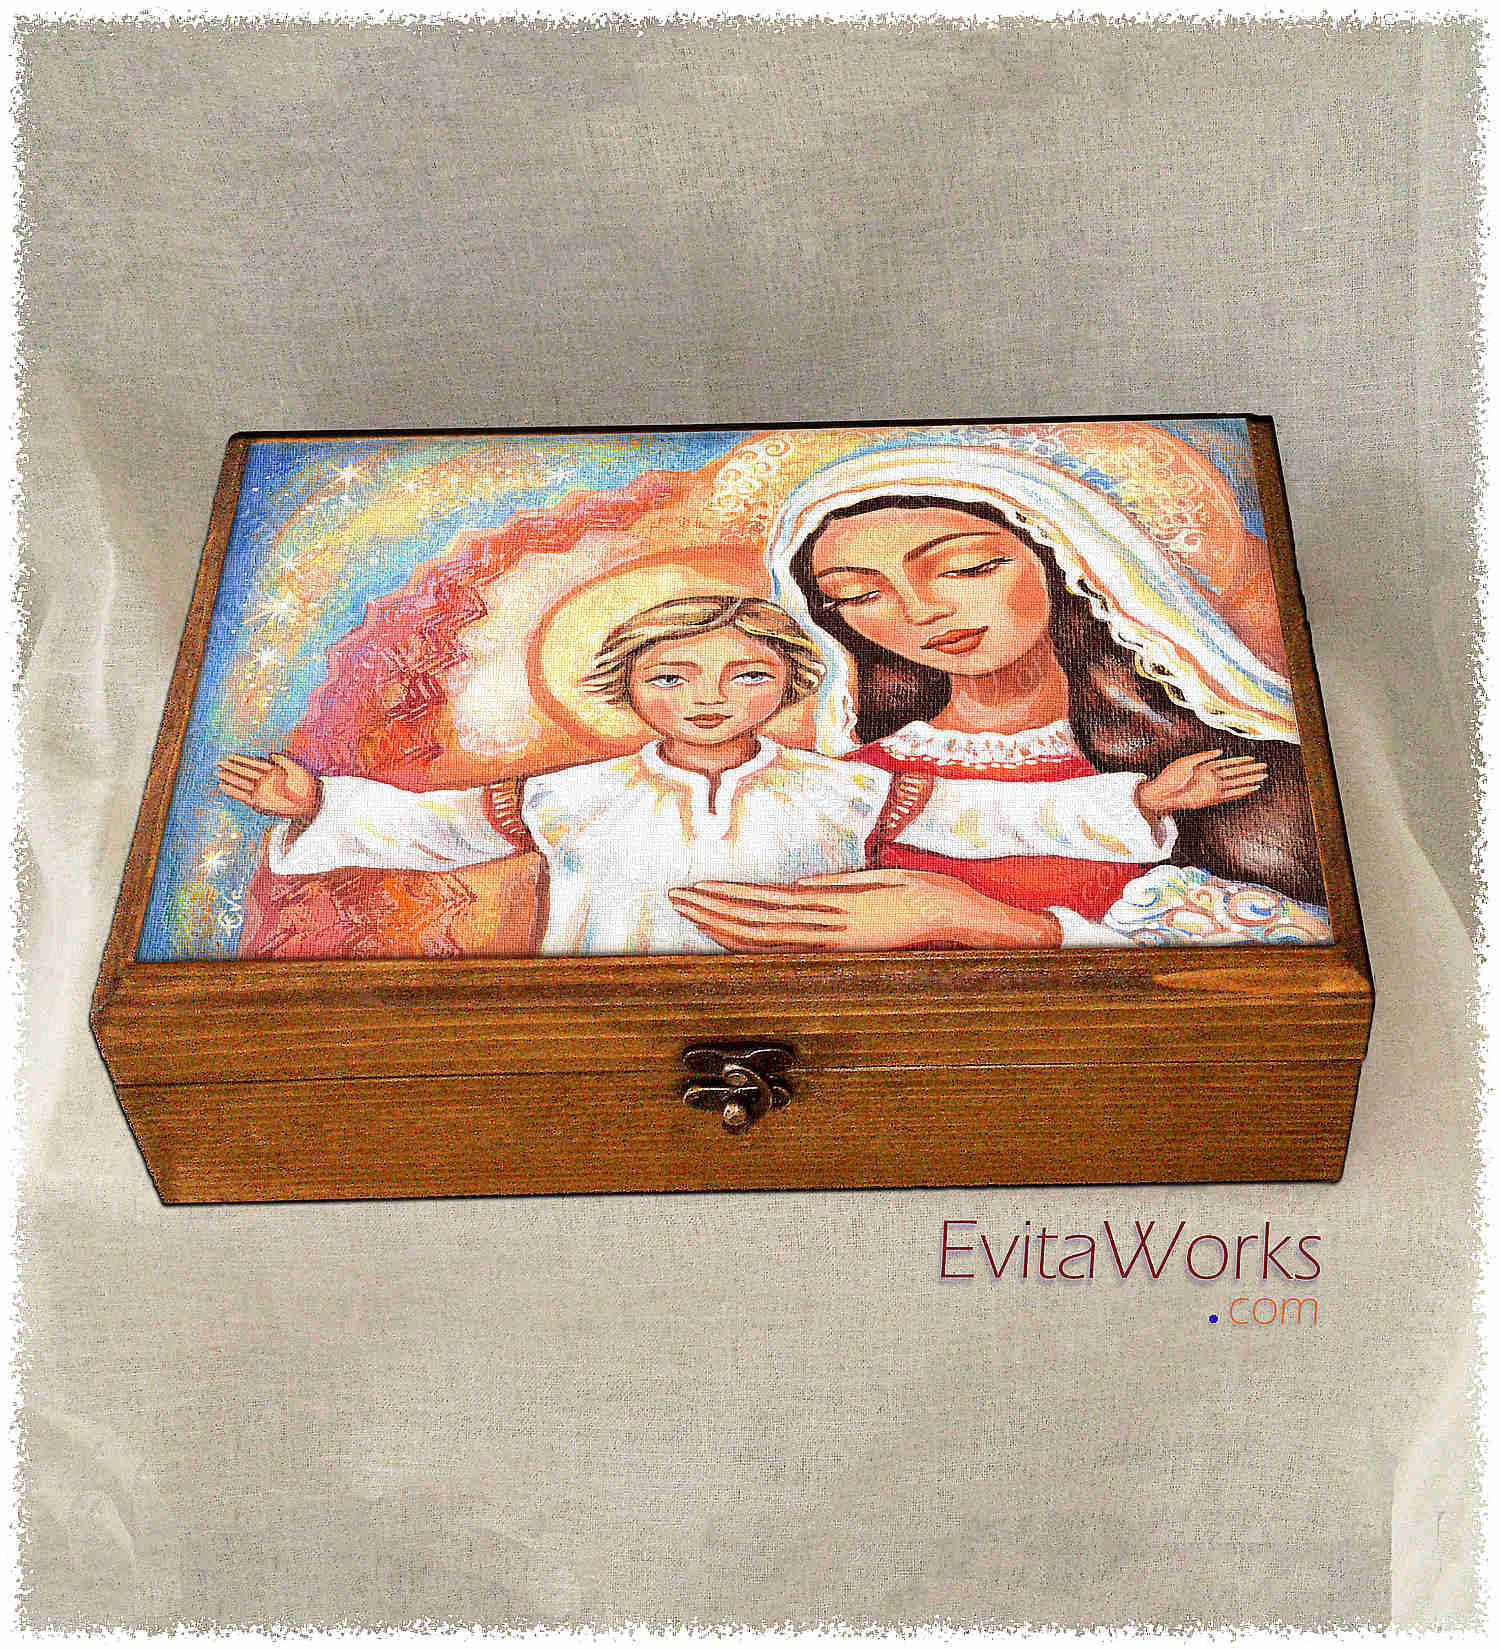 Hit to learn about "Gate to Heaven, mother and child" on jewelboxes